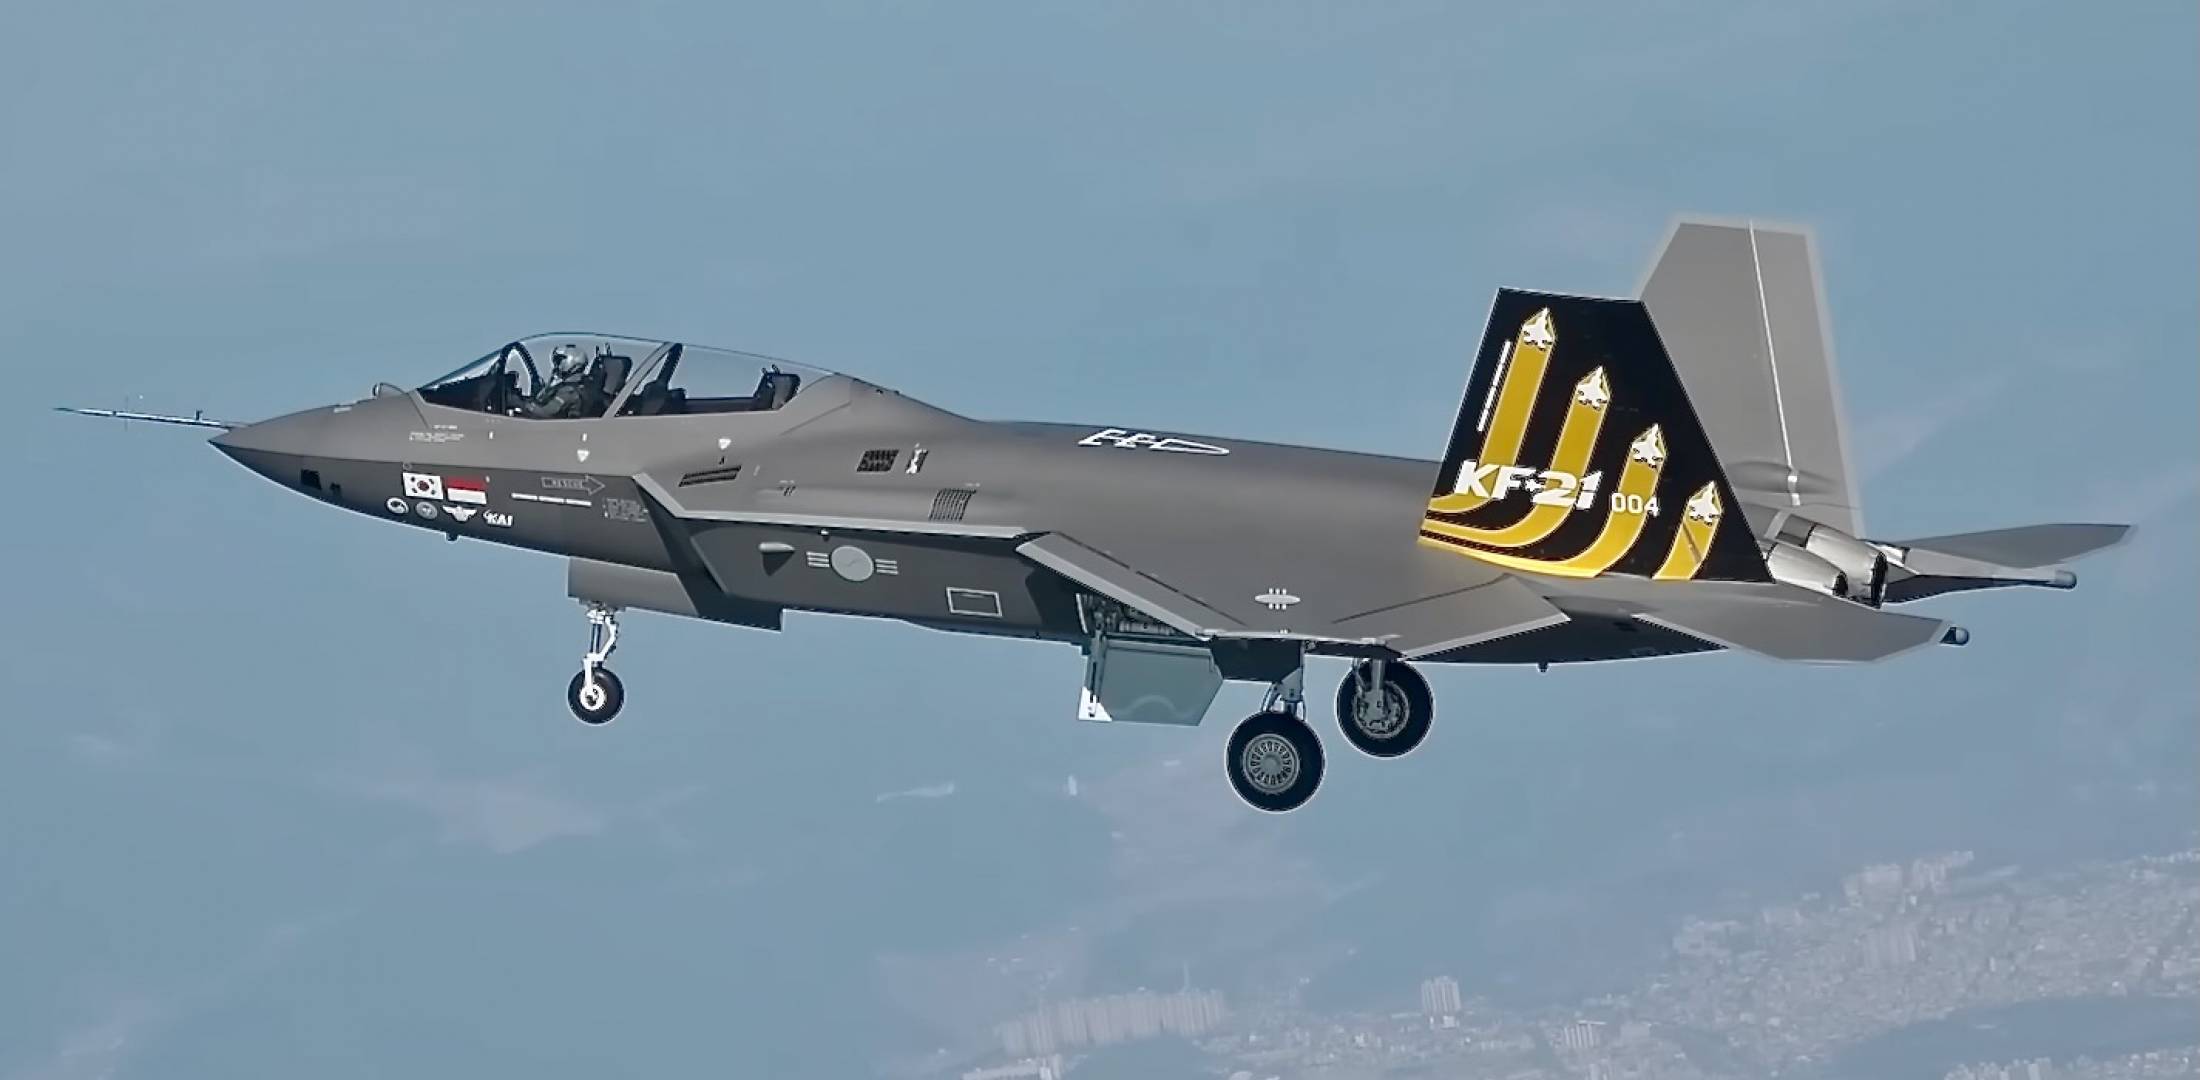 KF-21 fighter successfully passes preliminary operational capability assessment